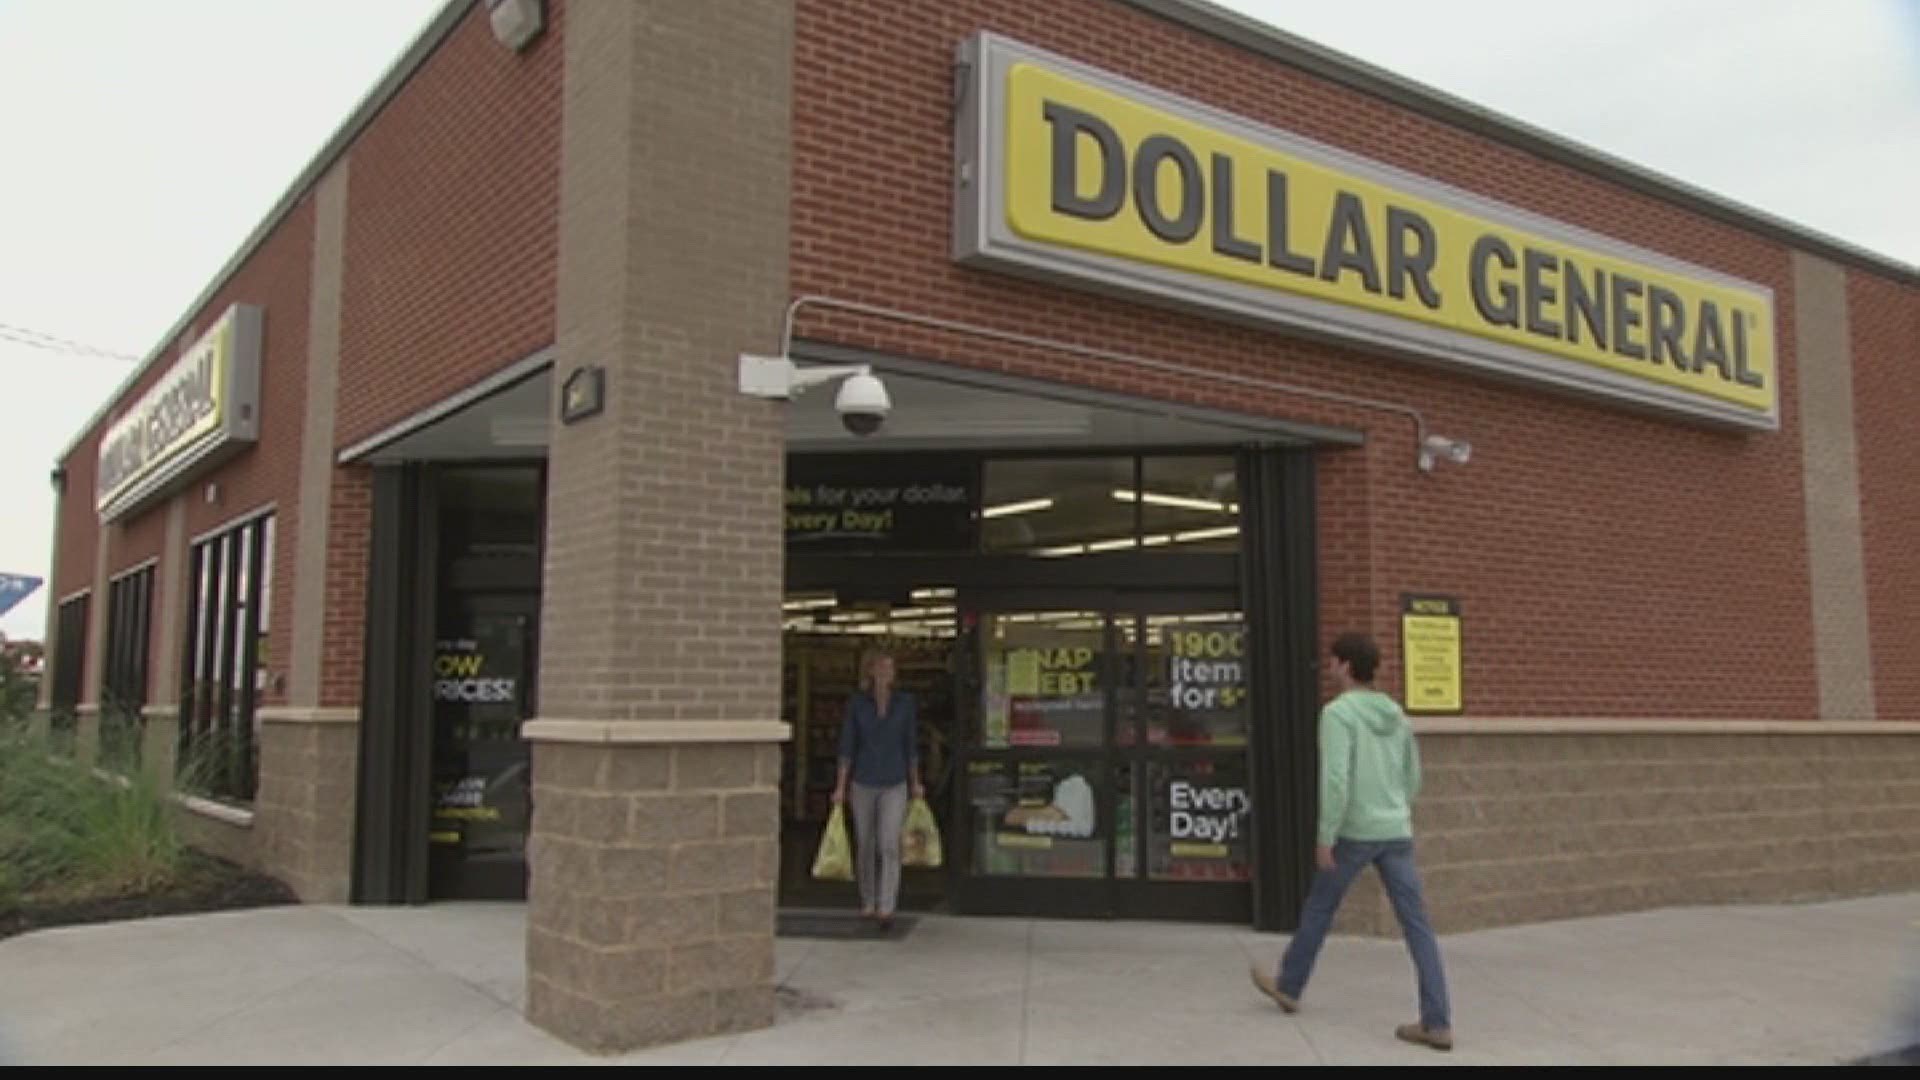 Many seniors are on fixed incomes and have trouble running errands in hectic shopping environments. Dollar General is adjusting their hours to help.